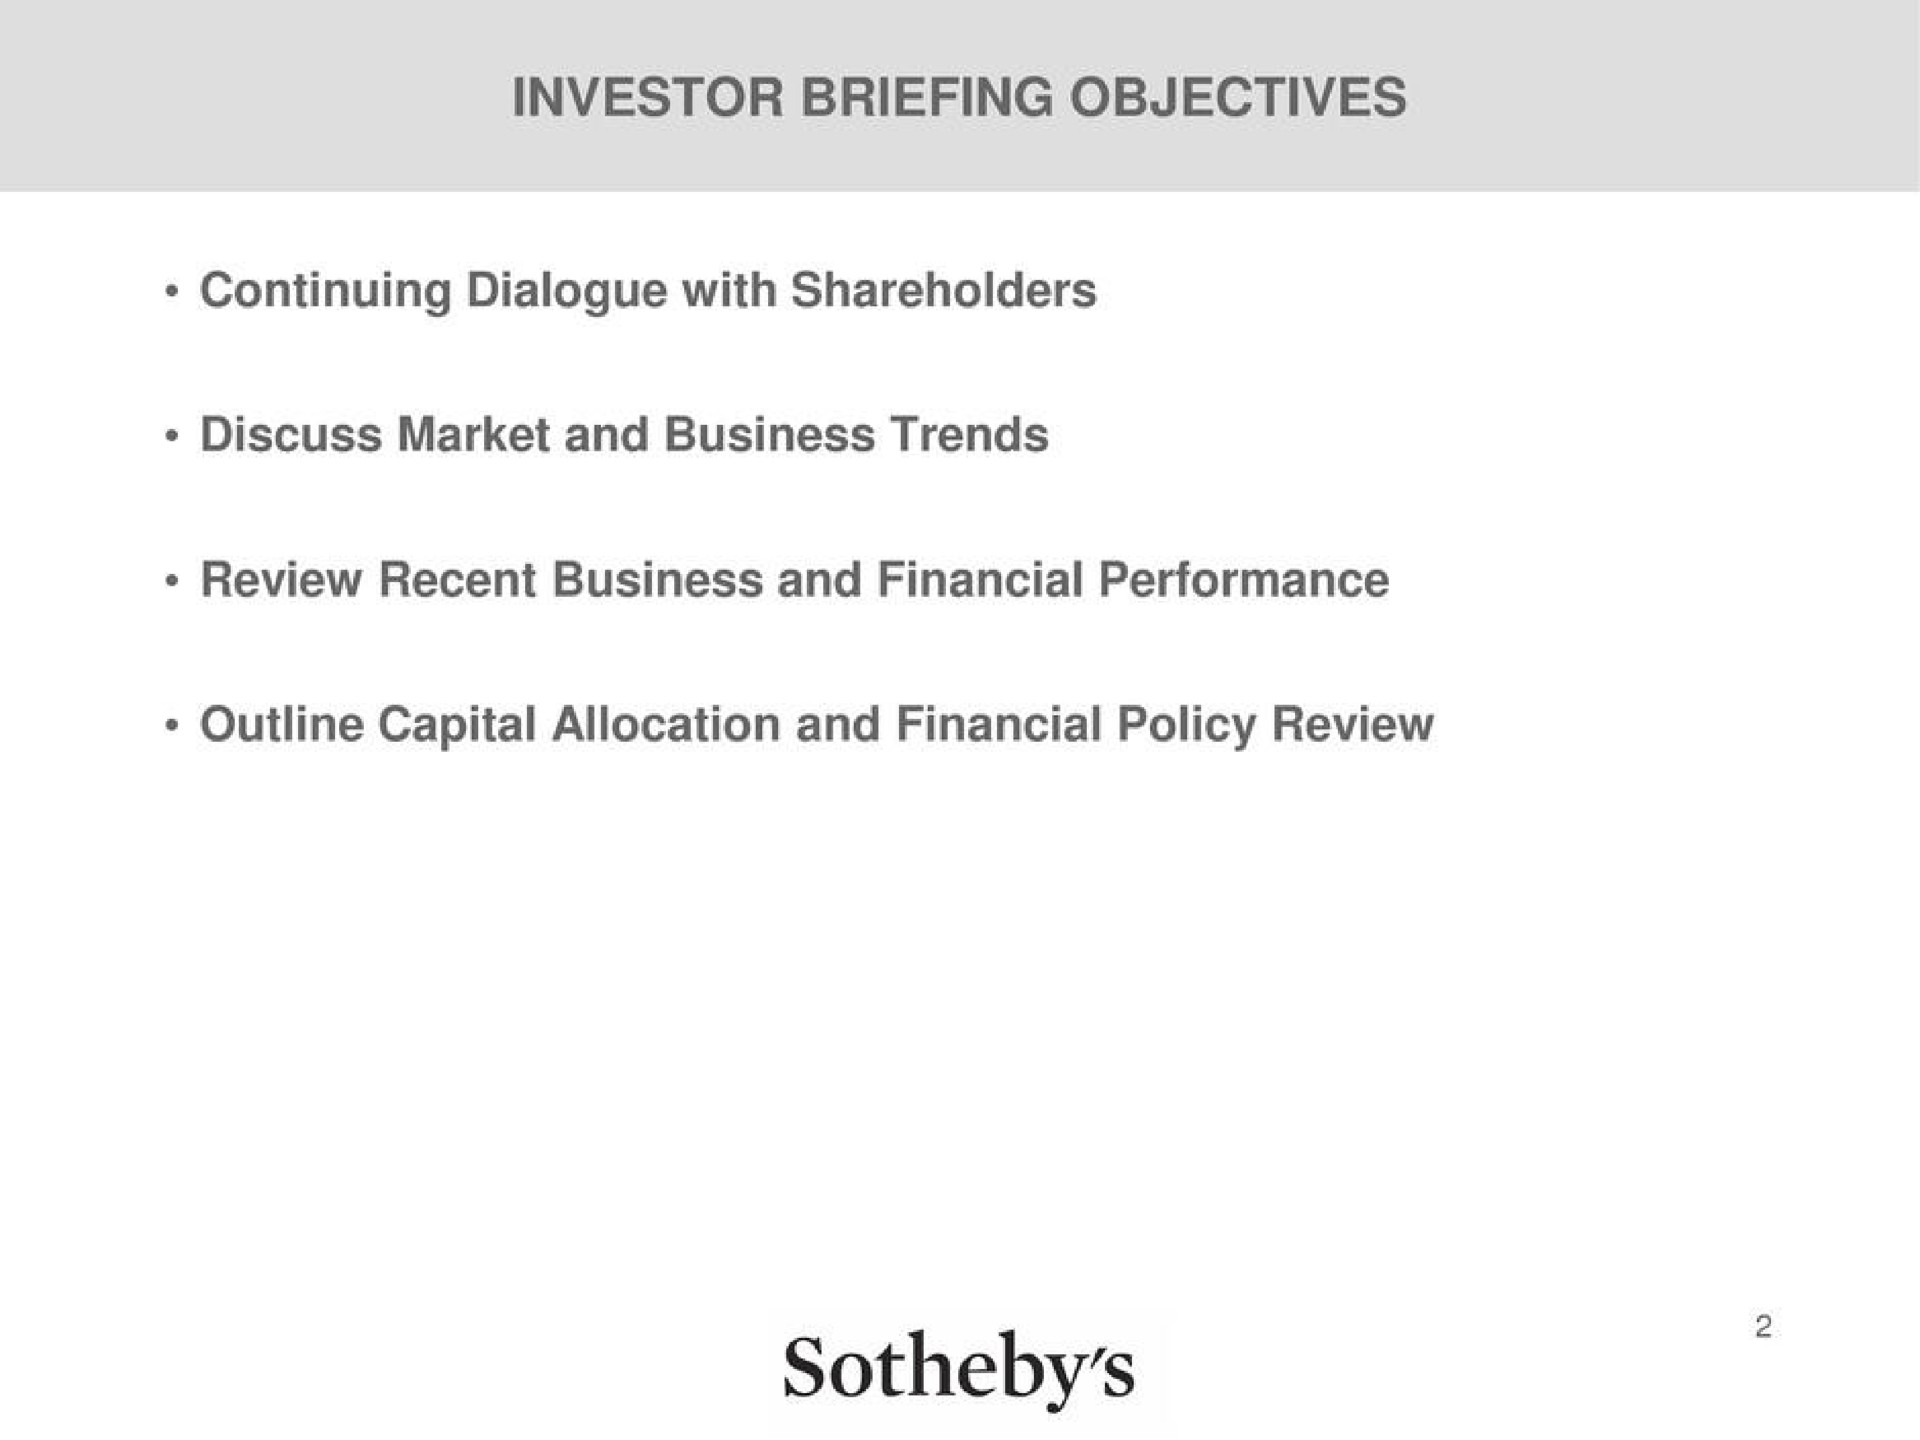 investor briefing objectives continuing dialogue with shareholders outline capital allocation and financial policy review | Sotheby's